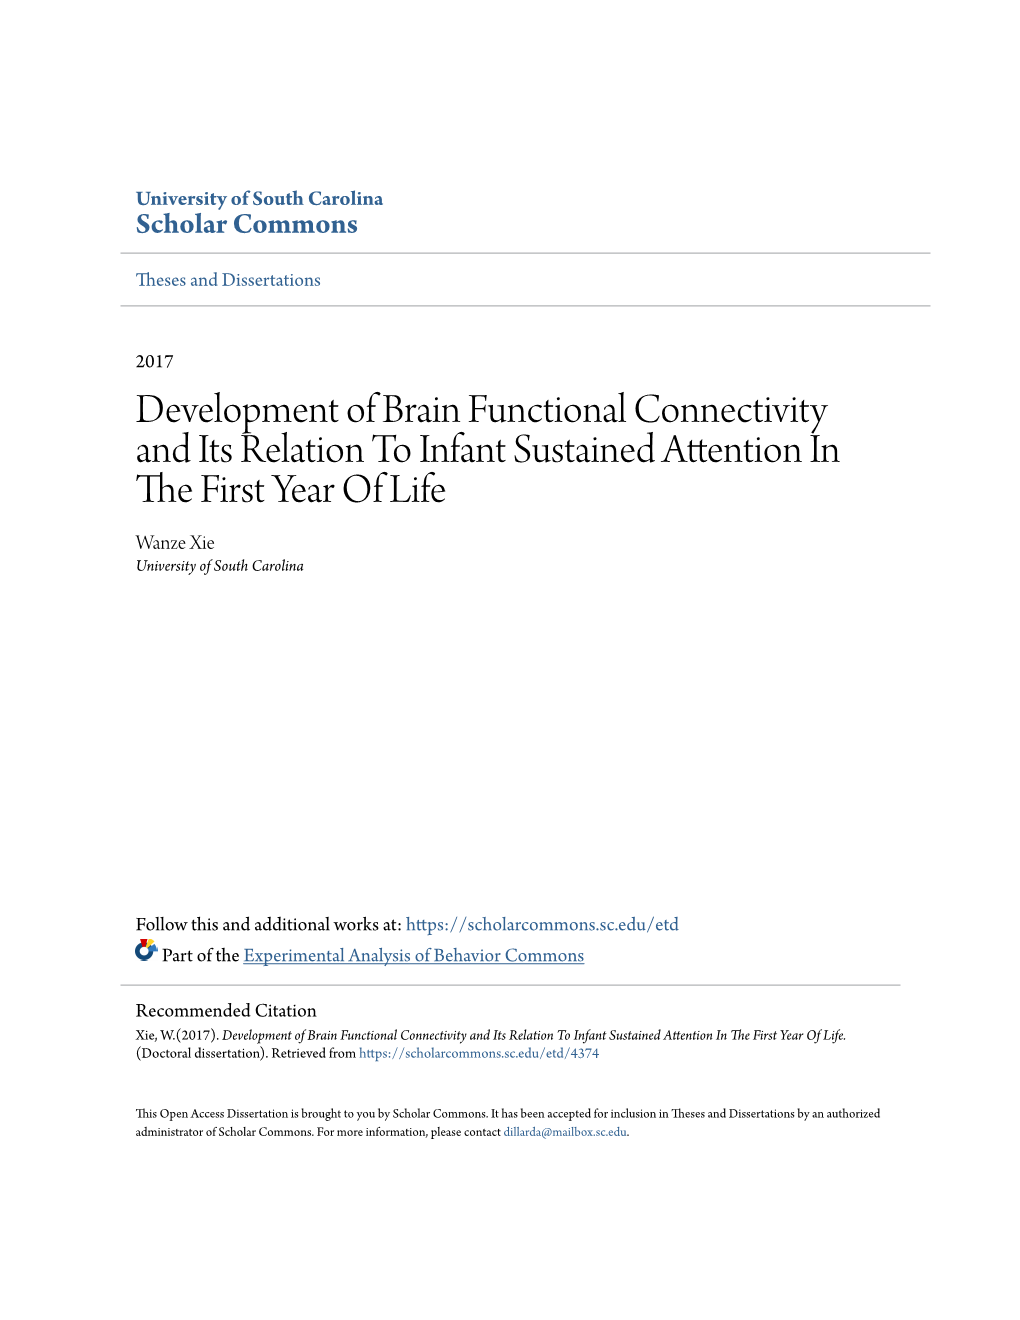 Development of Brain Functional Connectivity and Its Relation to Infant Sustained Attention in the Irsf T Year of Life Wanze Xie University of South Carolina